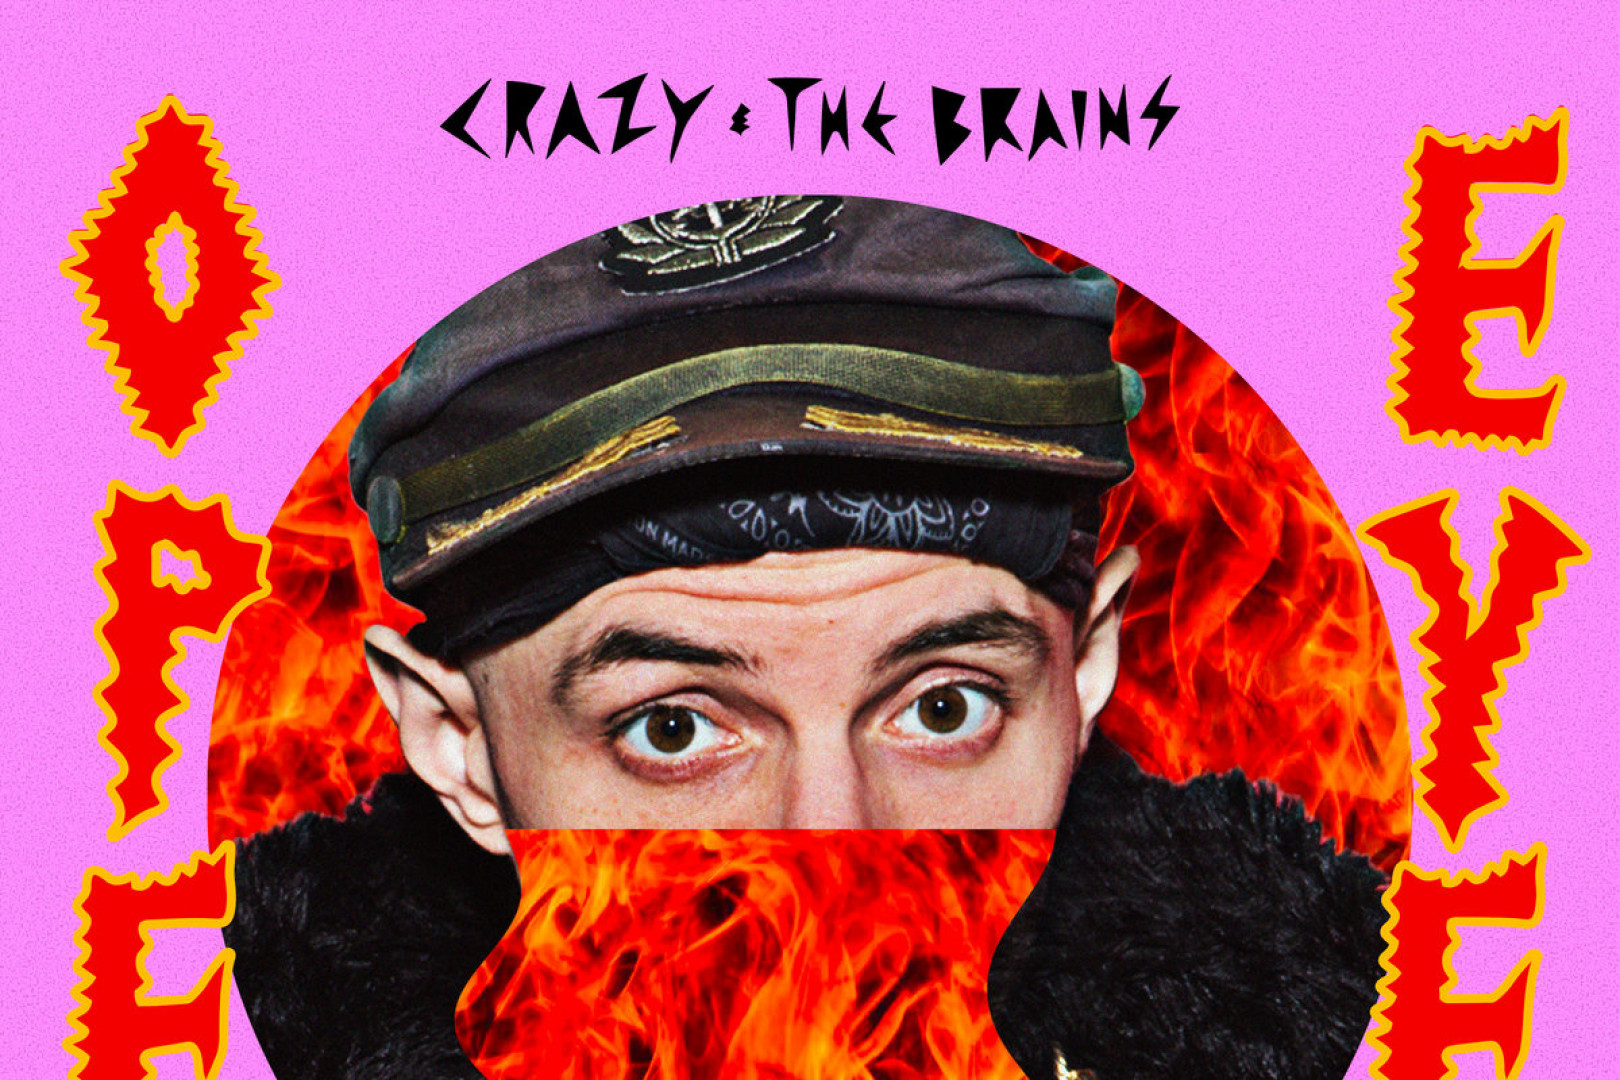 Crazy and the Brains release digital single